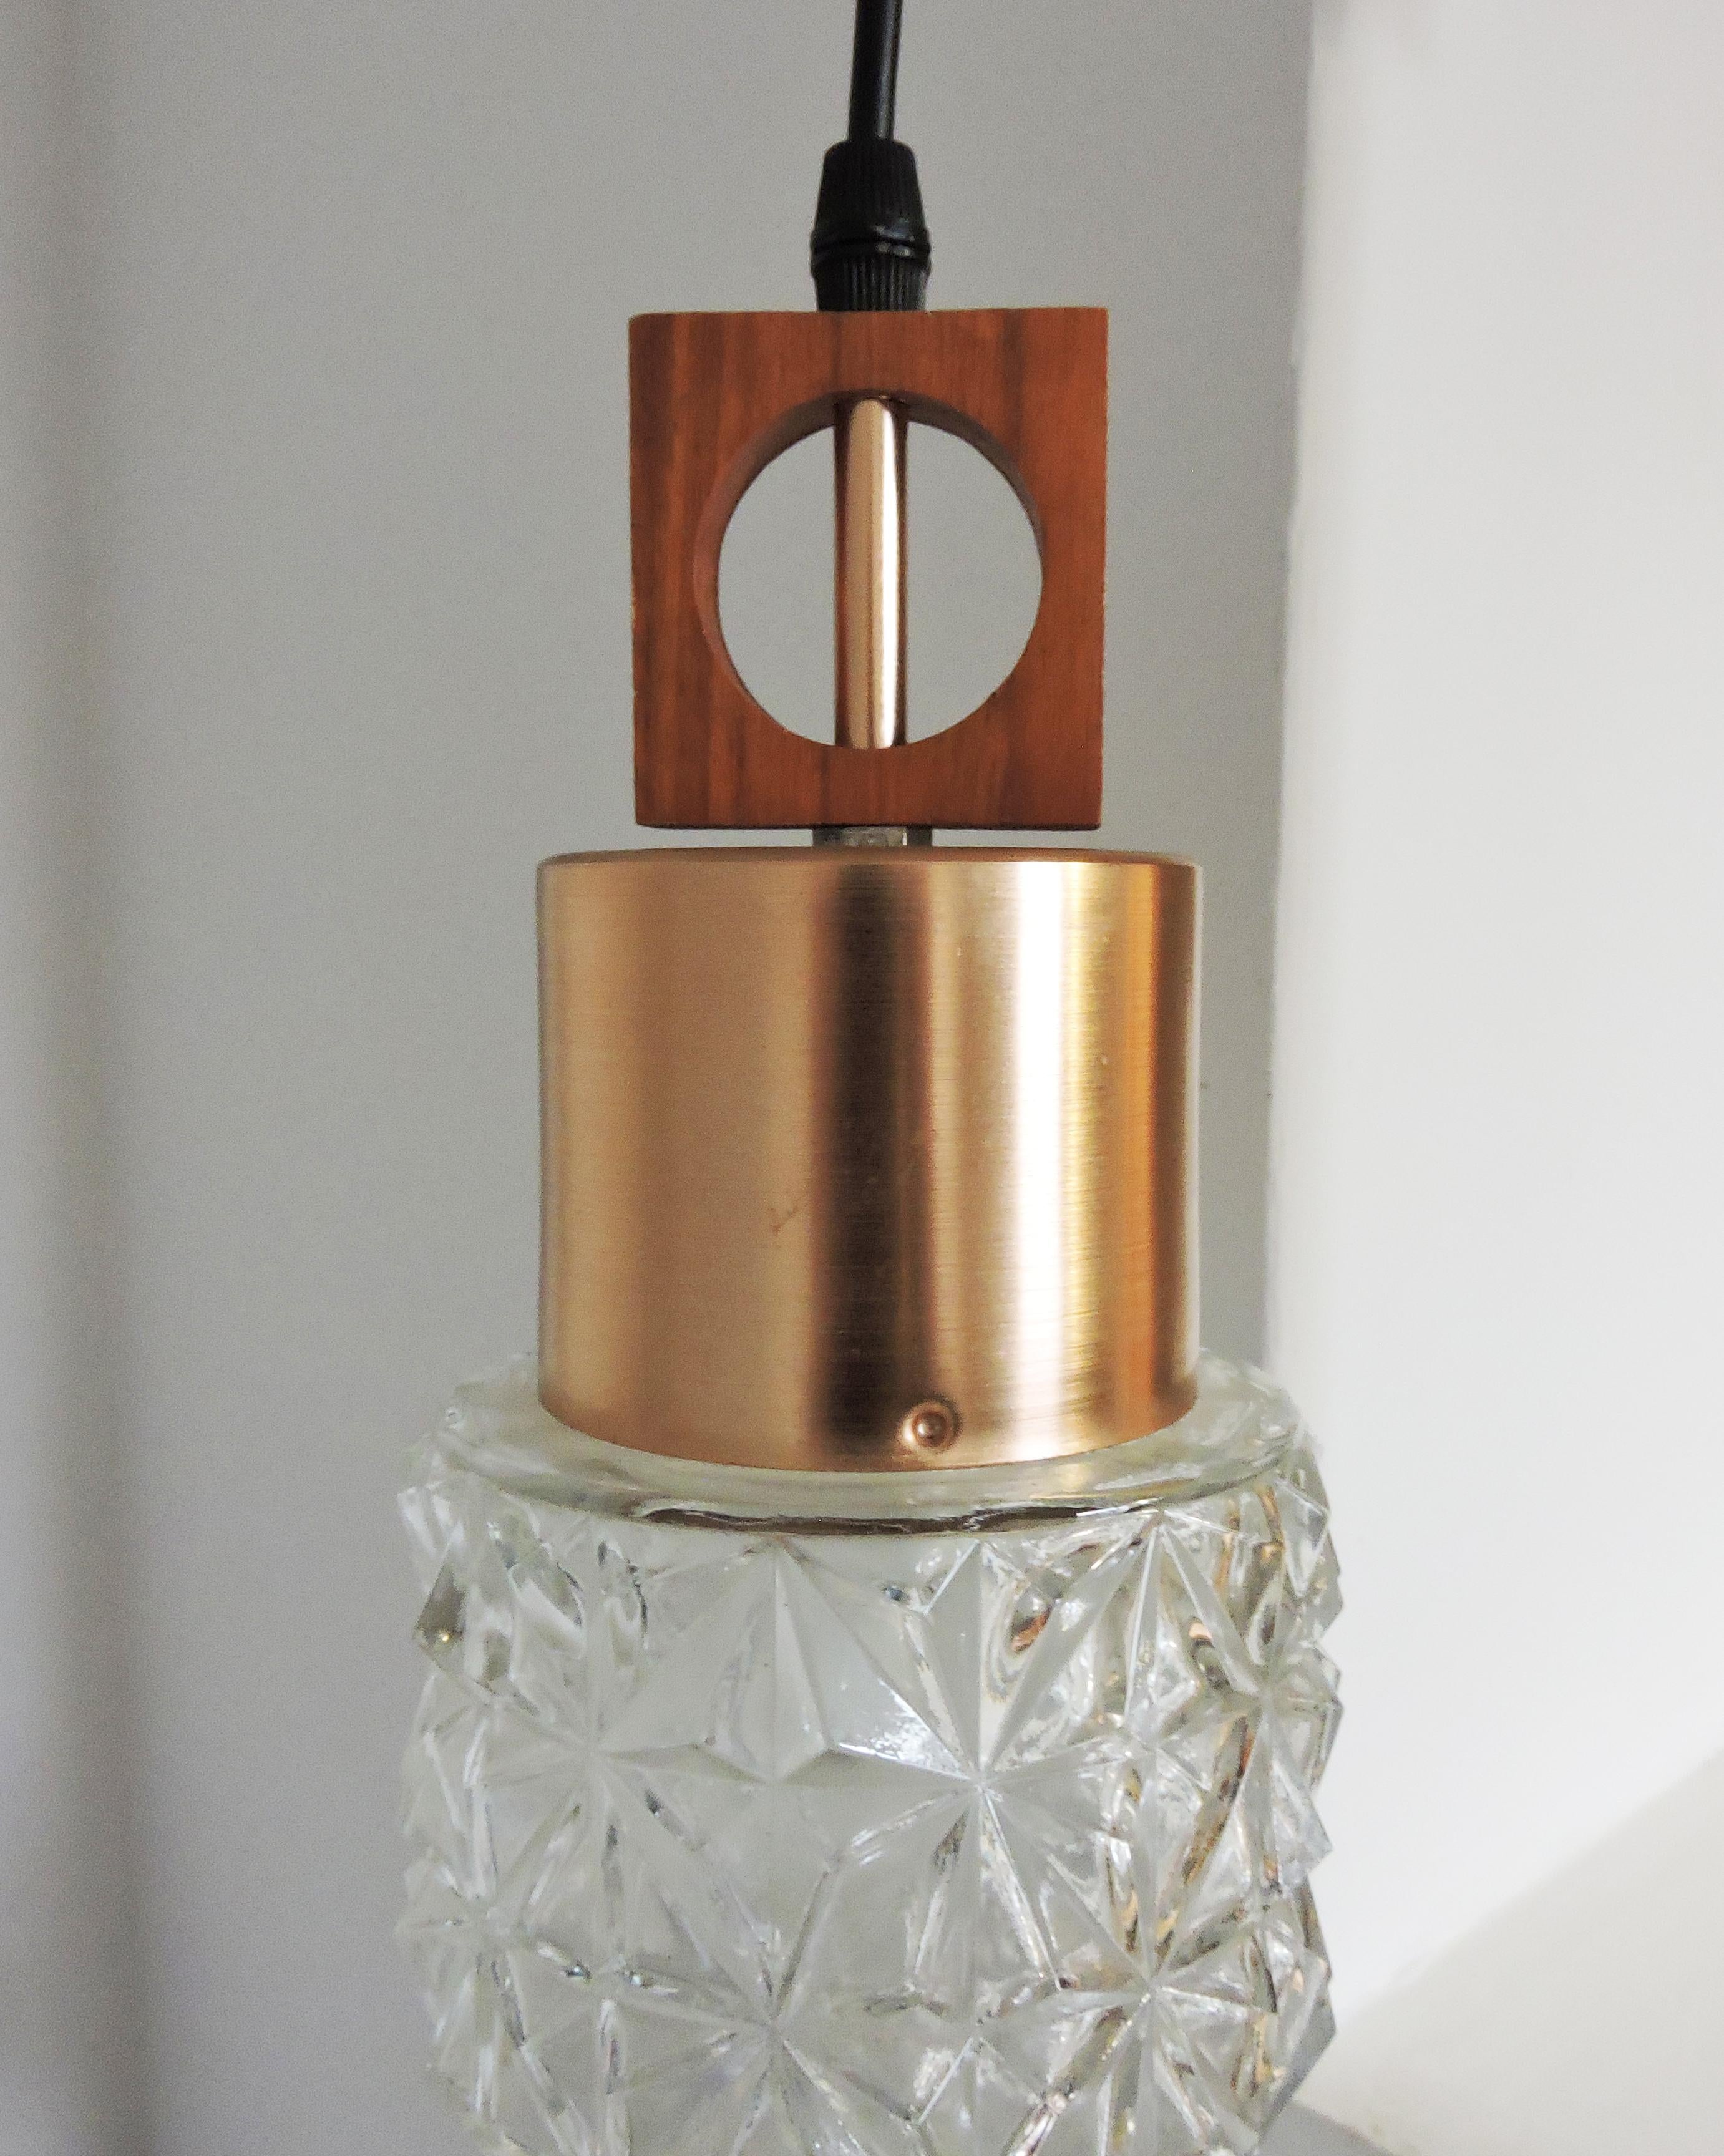 A 1970s glass and copper pendant light. The light hangs from a black wire and features a wooden square shape at the top.

A professional electrician has rewired this piece to be in working order.

Plug type - UK Plug (up to 250V).